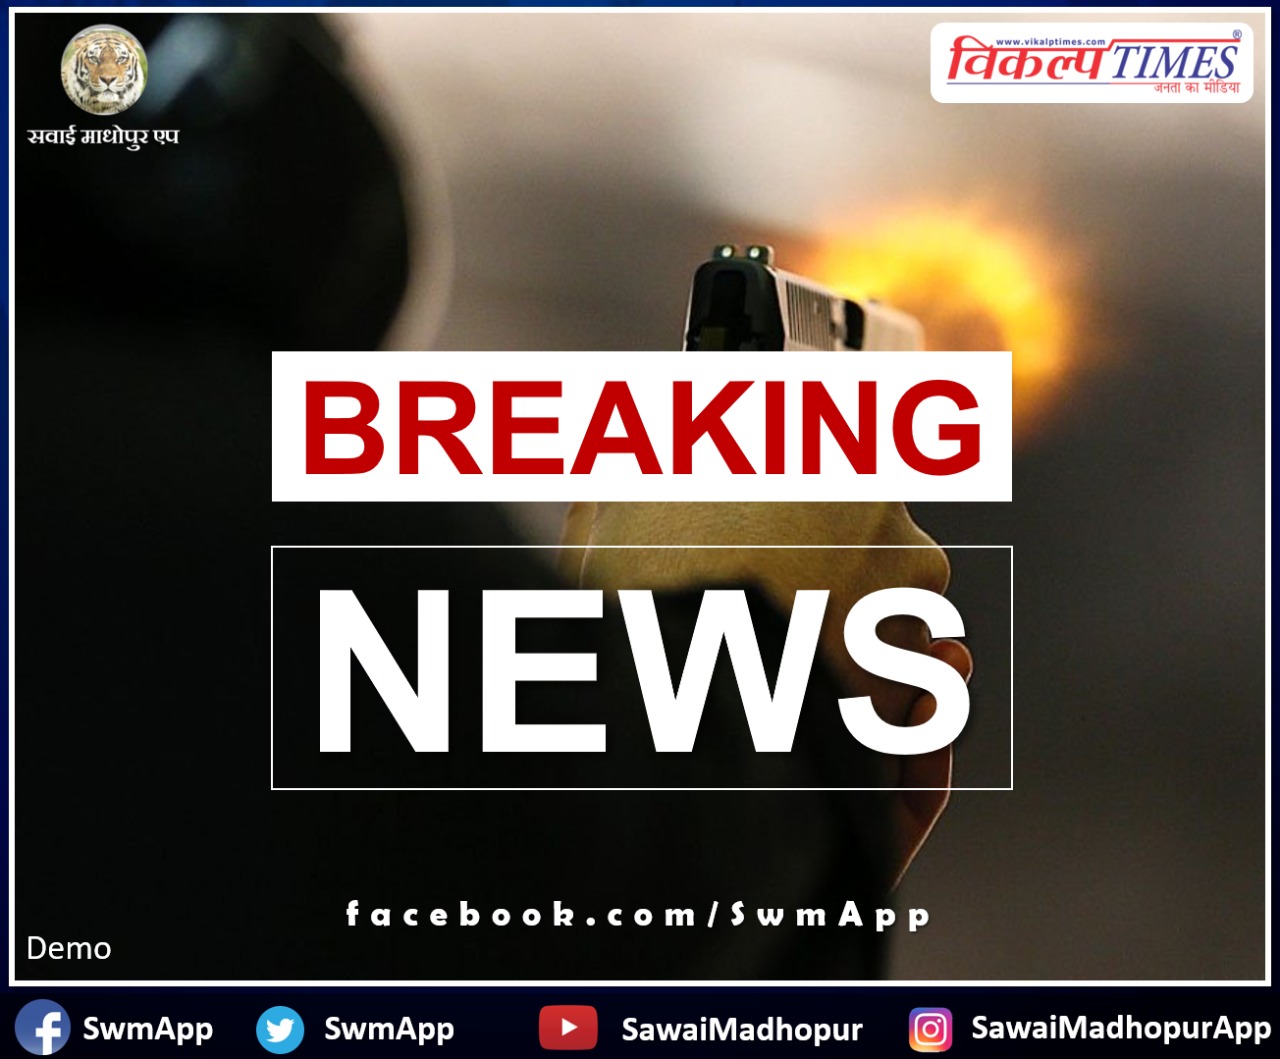 Firing took place in suspicious condition on the young man who came to the procession in sawai madhopur